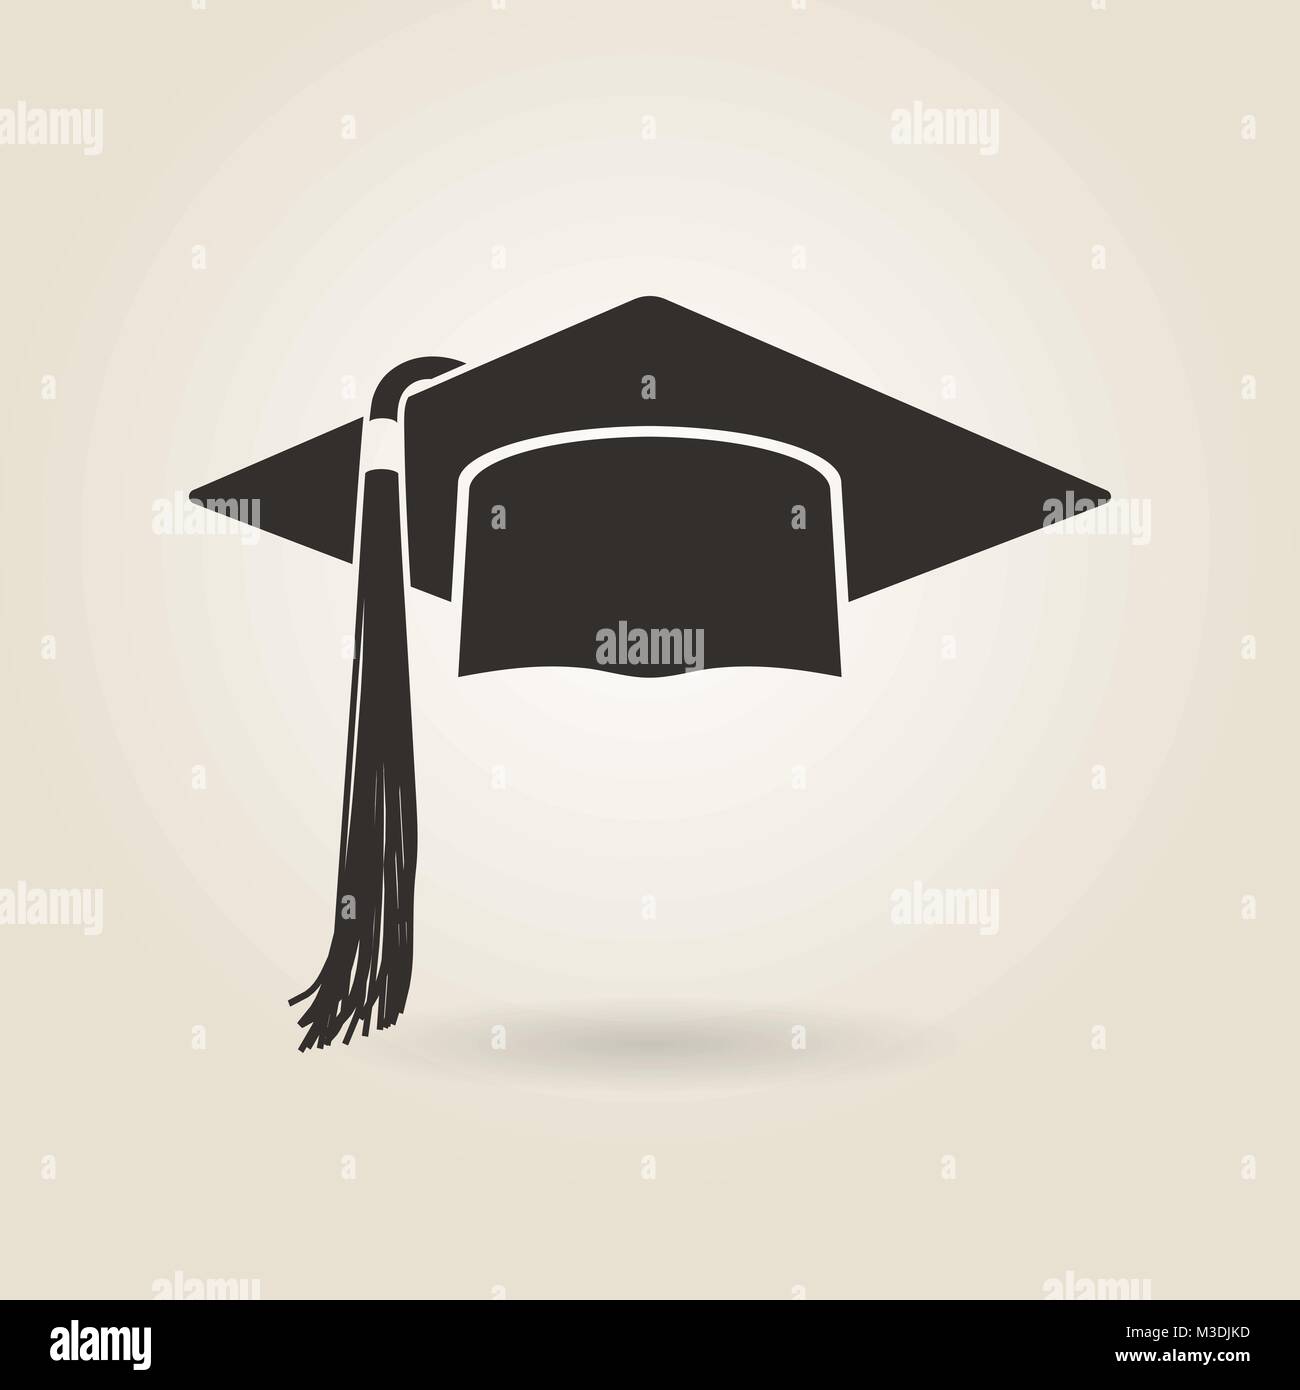 graduate cap icon on a light background Stock Vector